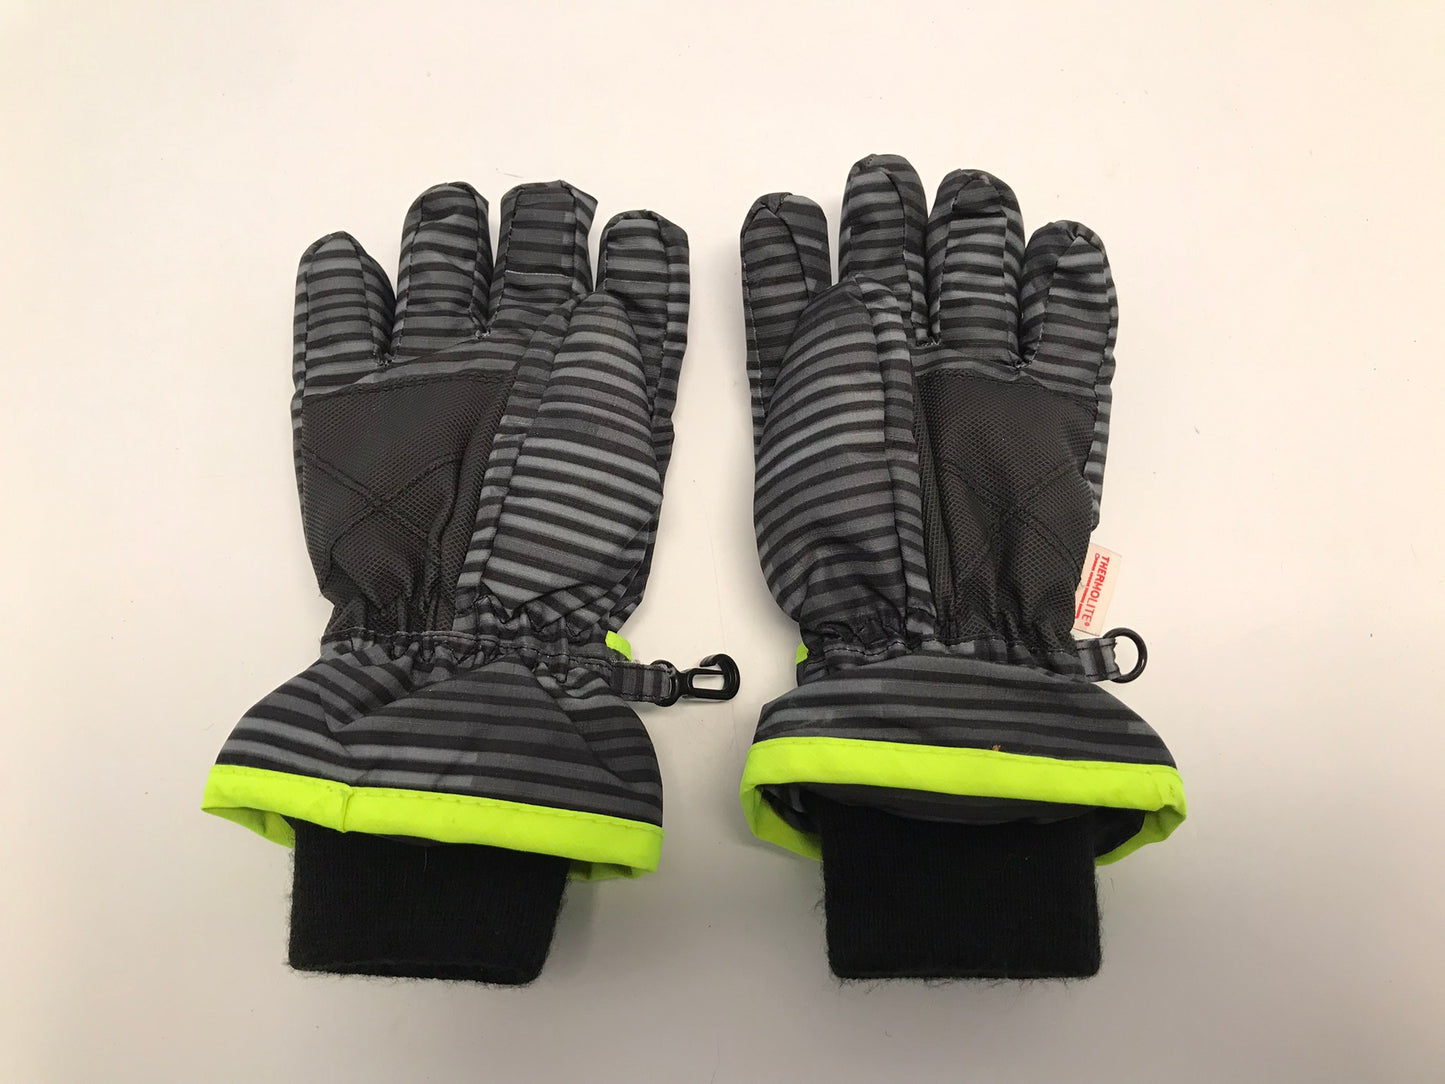 Winter Gloves and Mitts Child Size 4-7 Children's Place Grey and Neon Green Like New